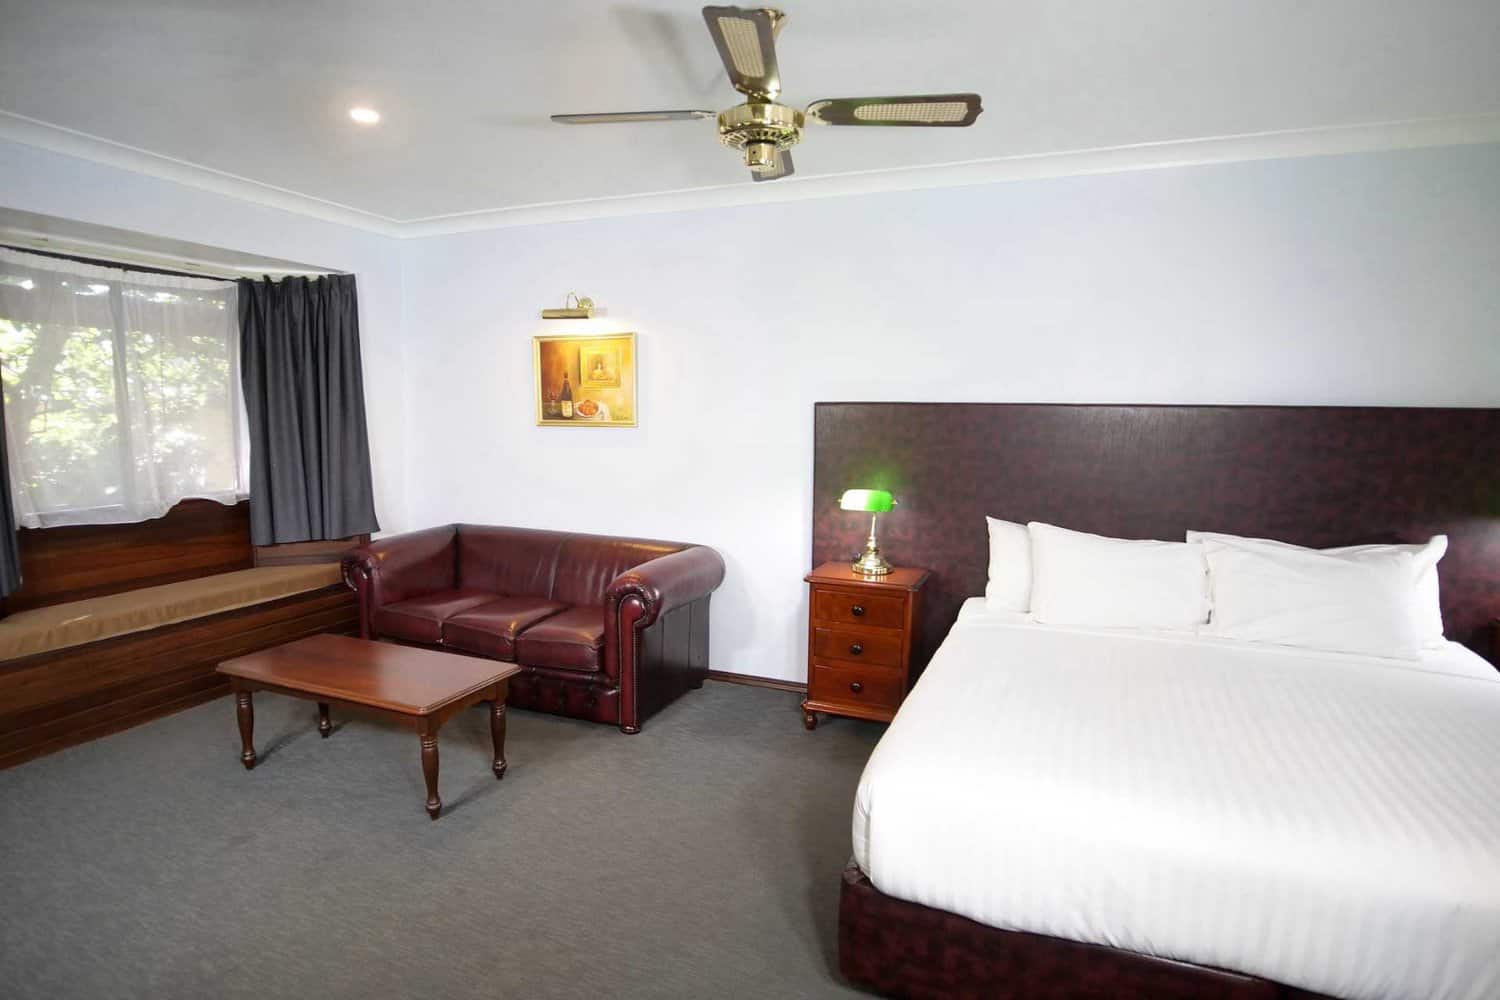 Classic hotel room with a large comfortable bed with white linens, a leather sofa, and a wooden coffee table, complete with a ceiling fan and a soft-lit lamp, providing a cozy atmosphere for guests.